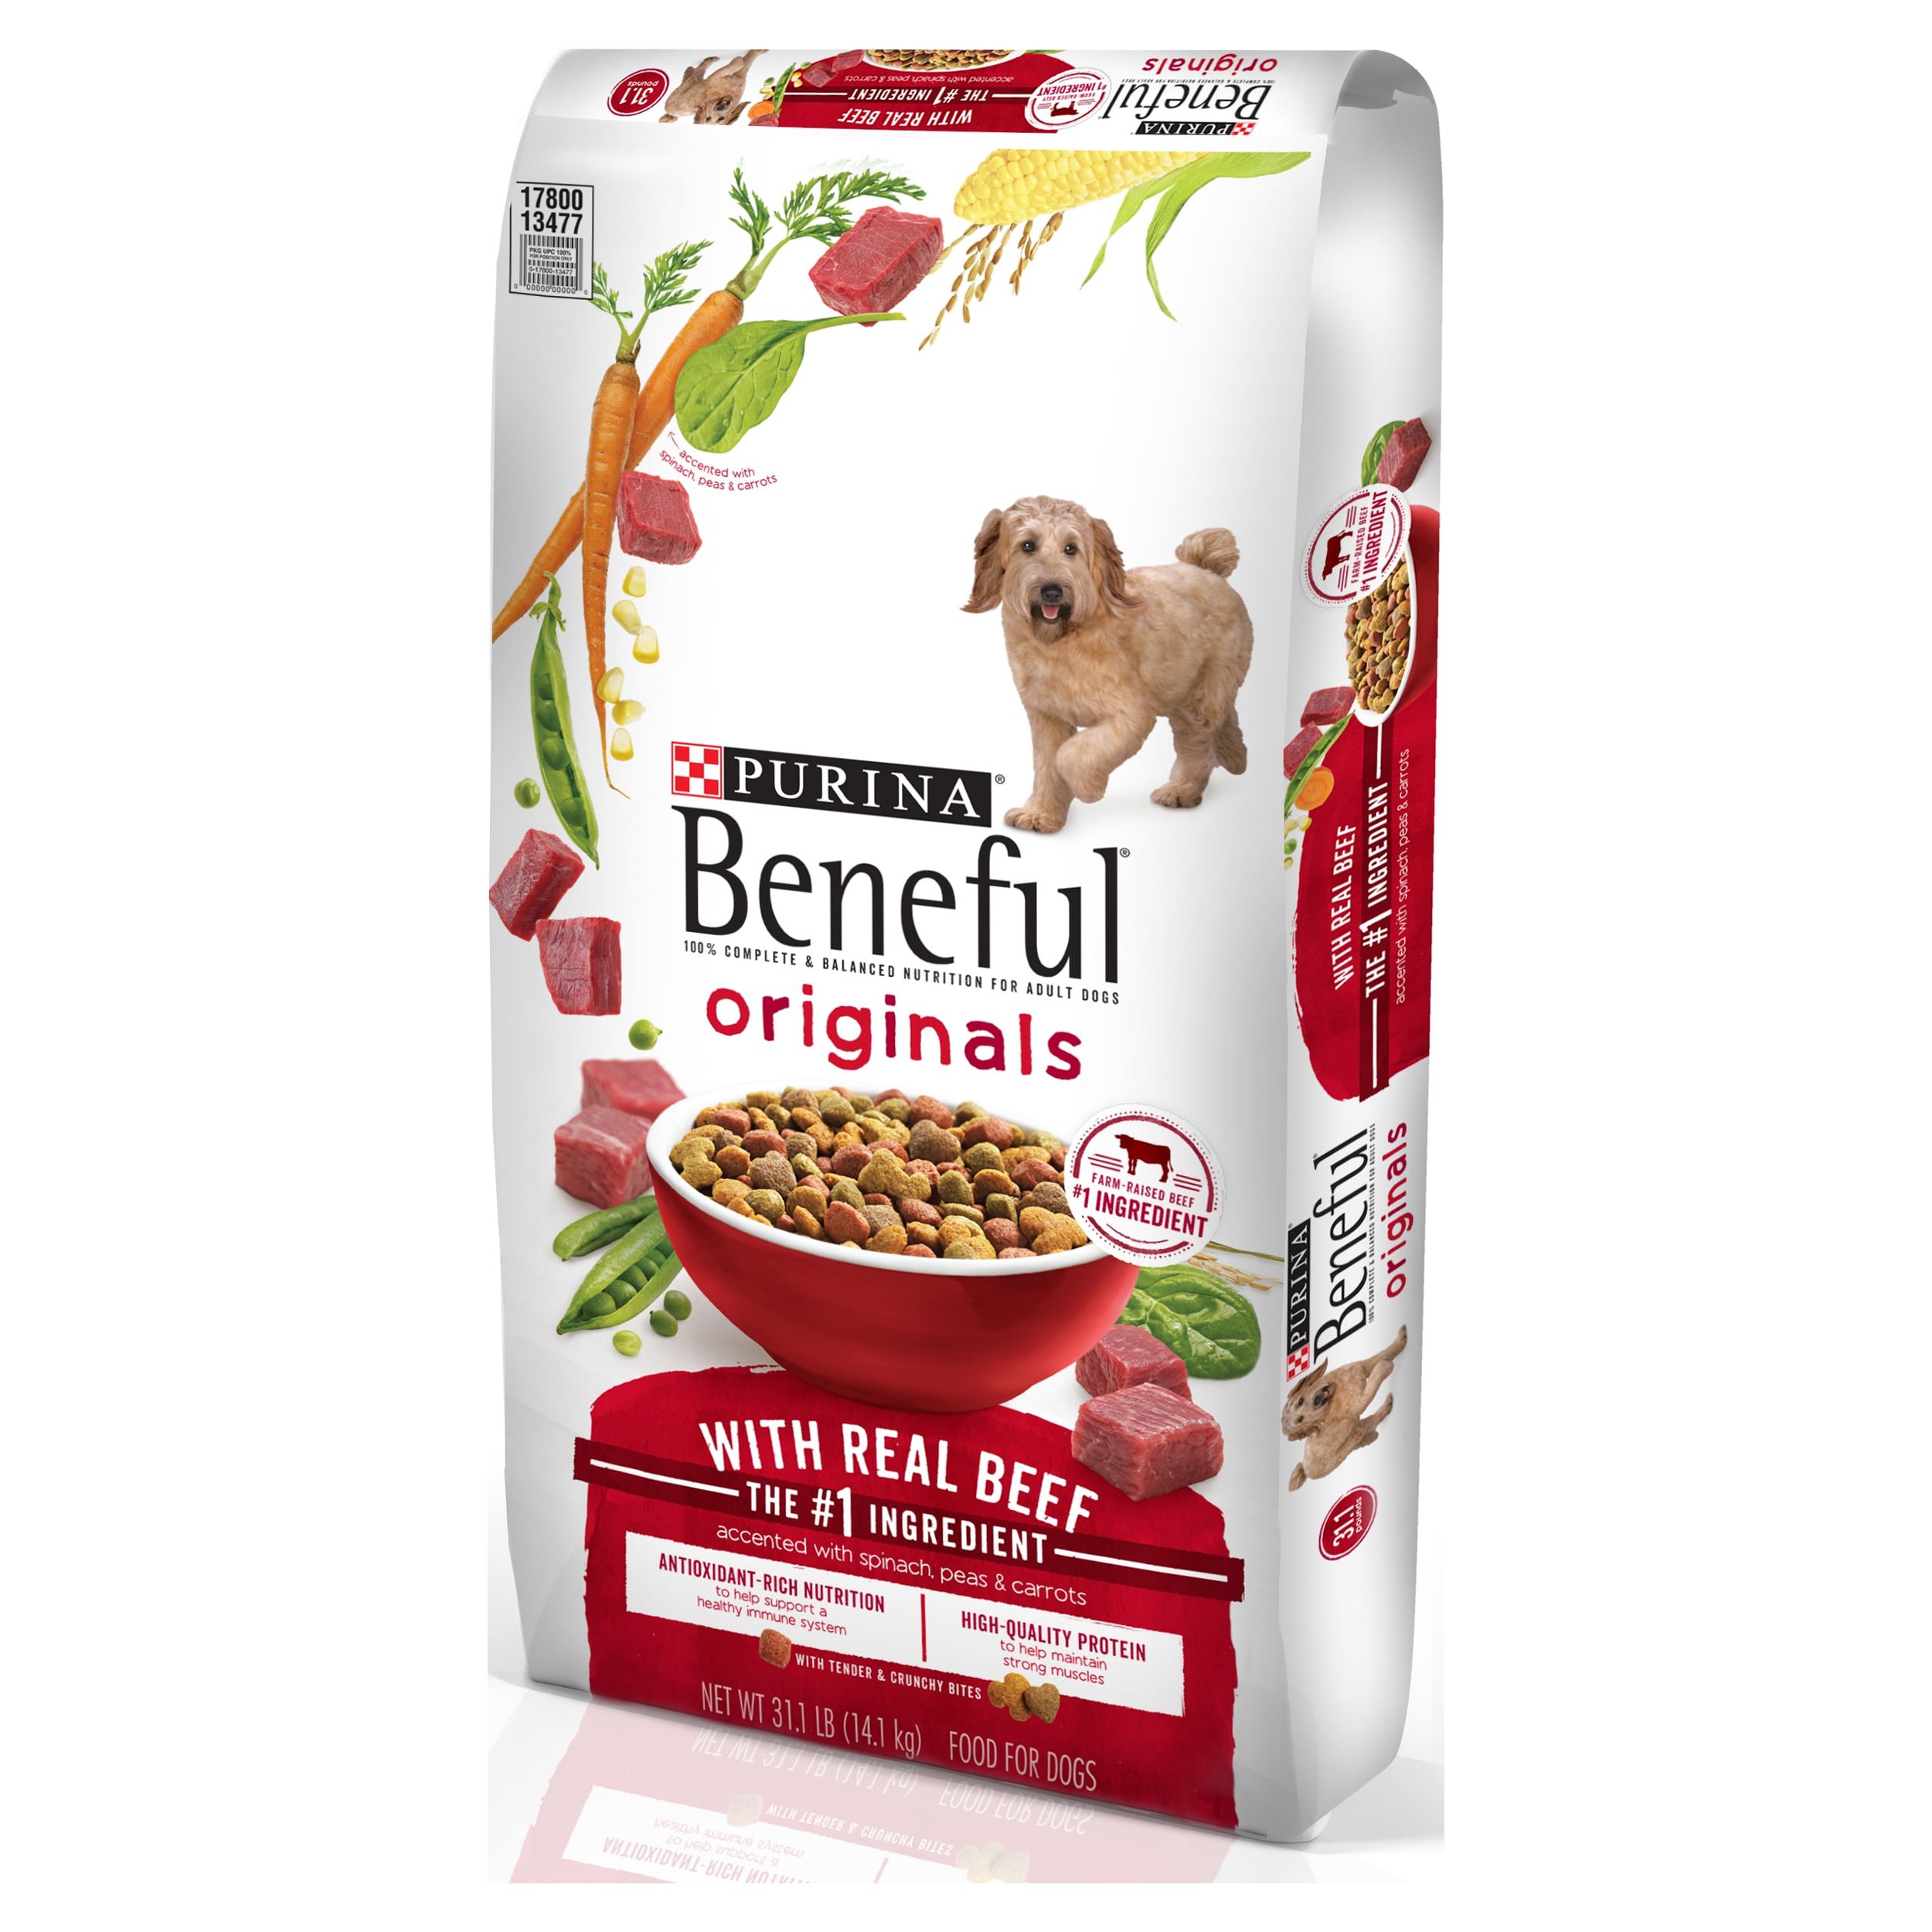 Purina Beneful Originals With Farm-Raised Beef, Real Meat Dog Food, 31.1 lb. Bag - image 1 of 11